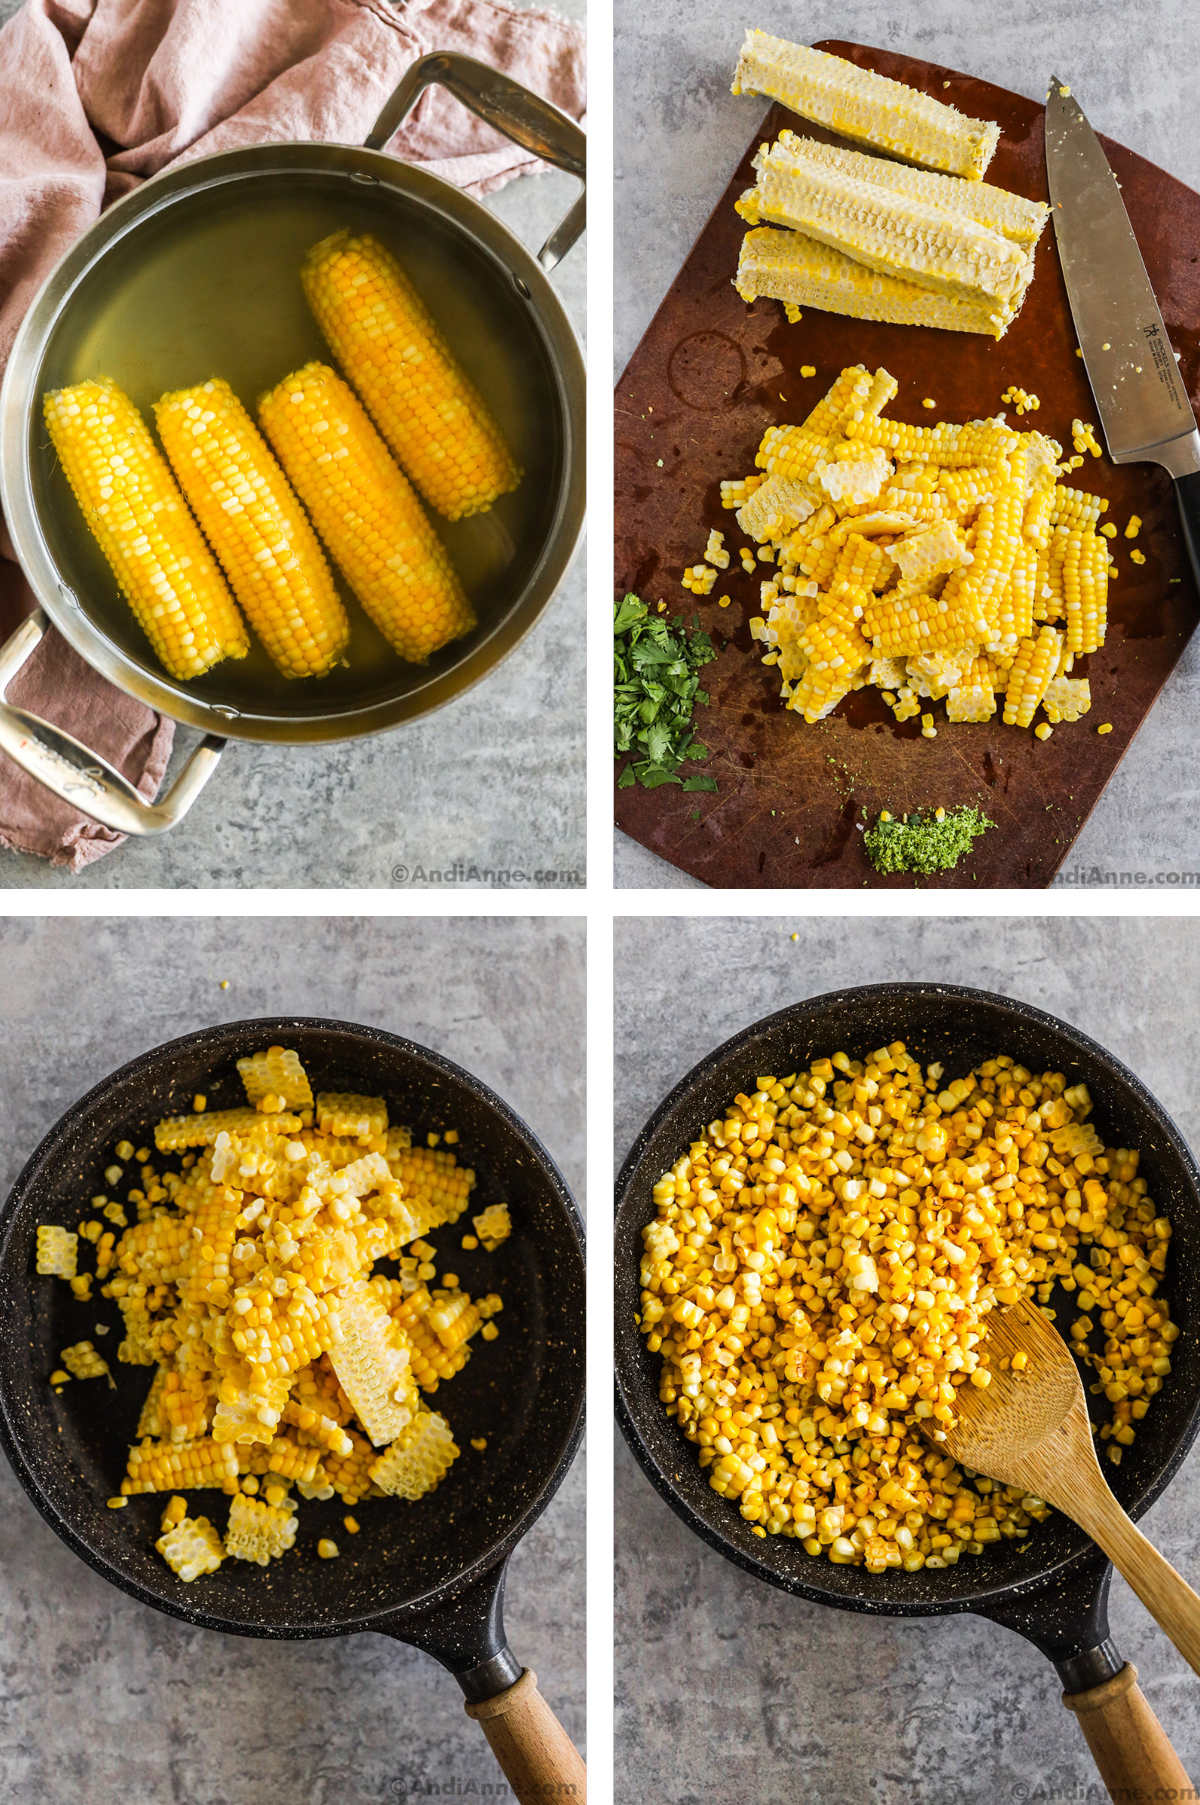 Four overhead images in one: 1. Boiled corn cobs in a pot of water. 2. Corn cut off the core with a chef knife on a cutting board. 3. Corn placed in a frying pan. 4. Corn in frying pan has been browned. 